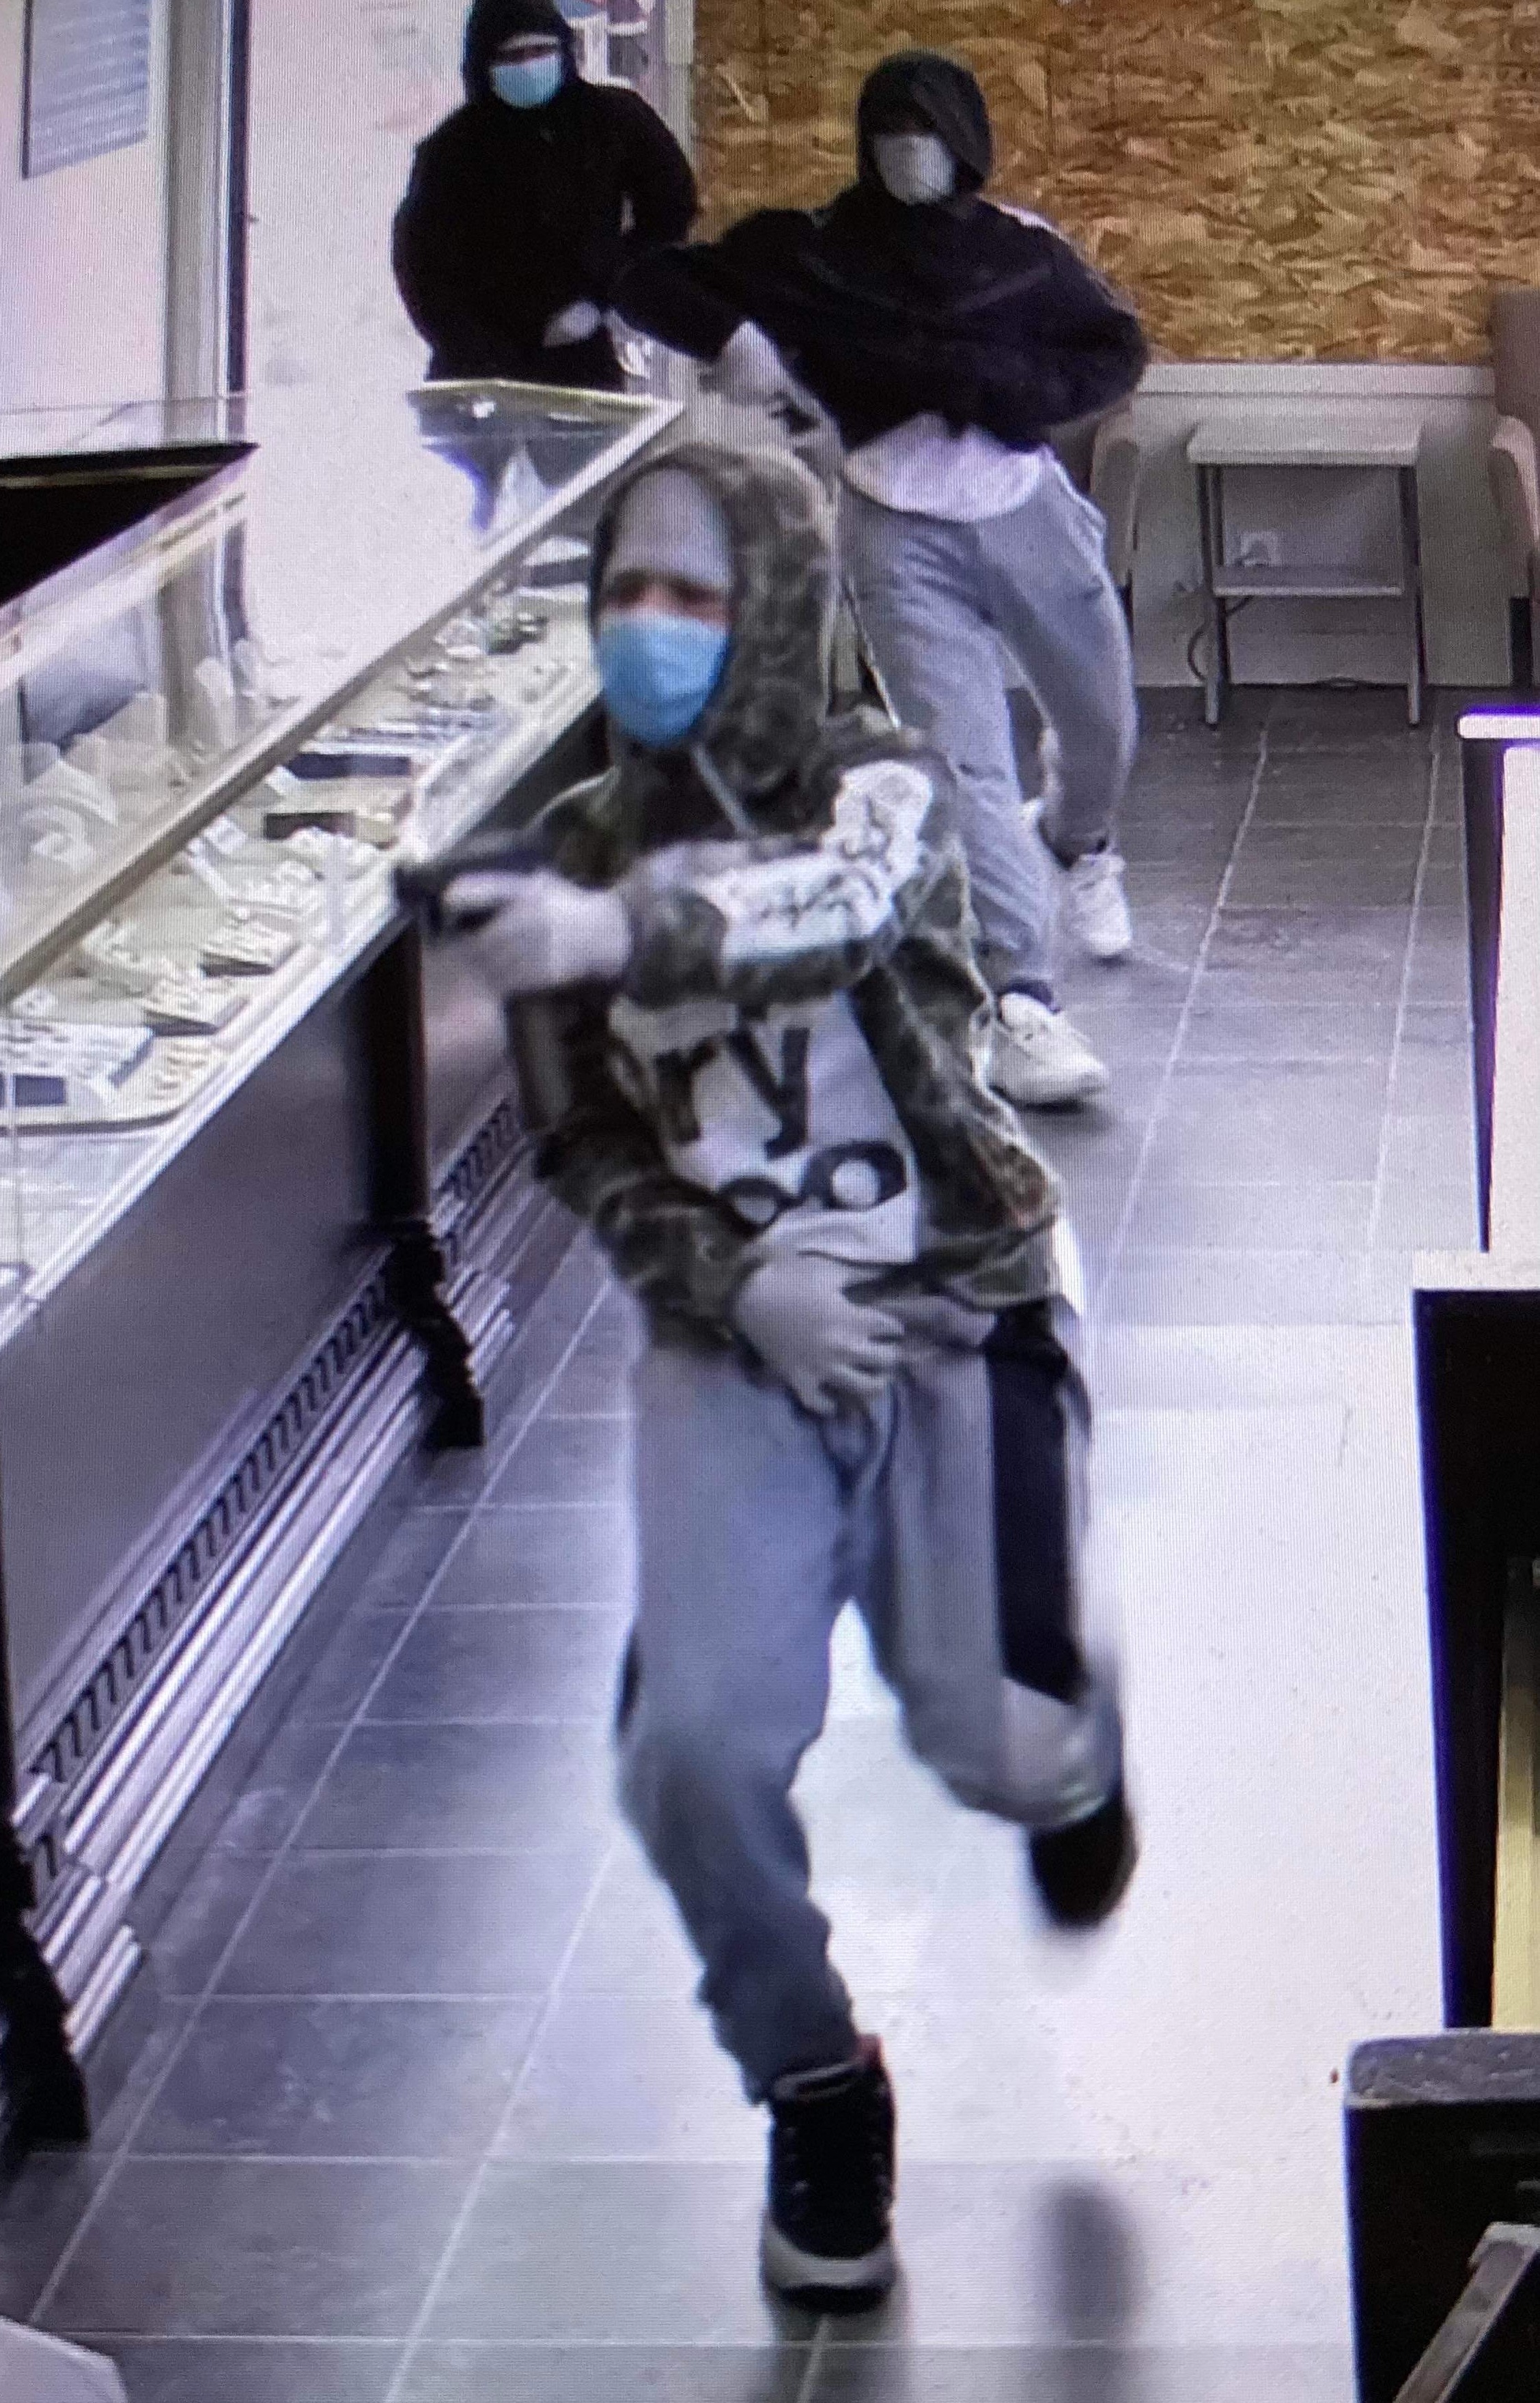 Update Two Suspects Identified In The Armed Robbery At Bellevue Rare Coins In The Junction